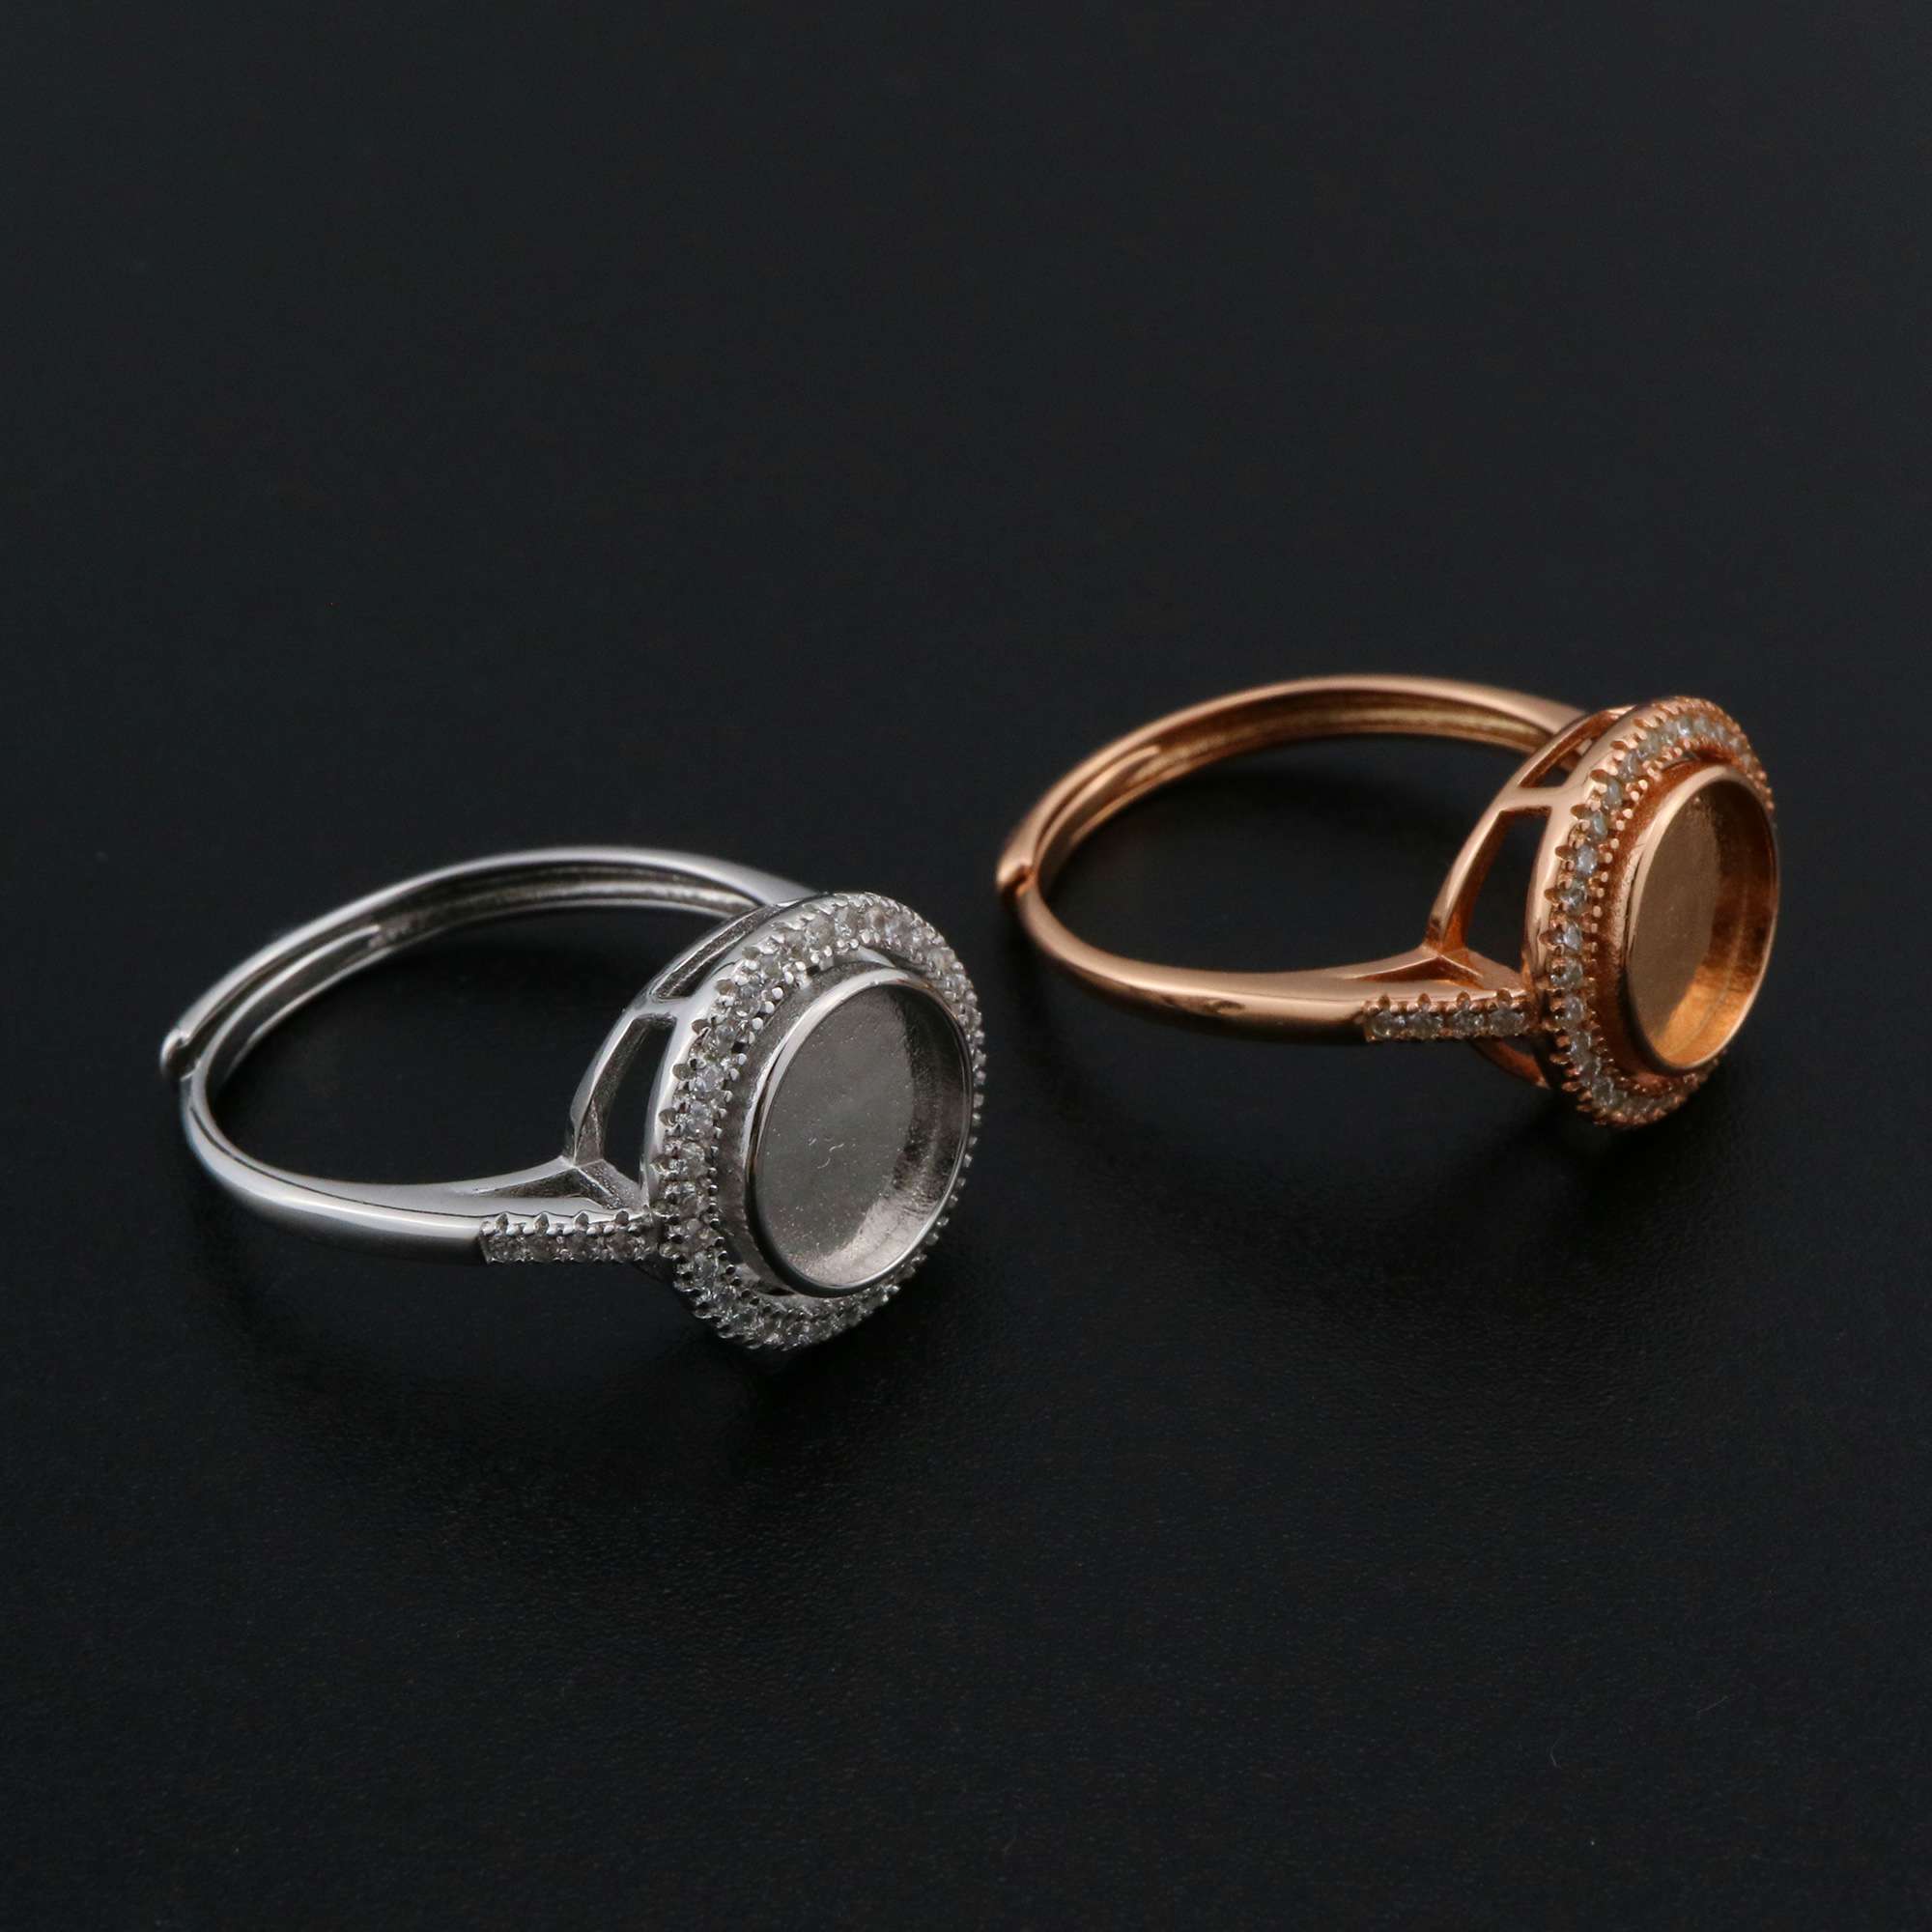 Keepsake Breast Milk Resin Ring Settings Round Solid Back 925 Sterling Silver Rose Gold Plated 8MM Halo CZ Stone Ring Bezel 1210092 - Click Image to Close